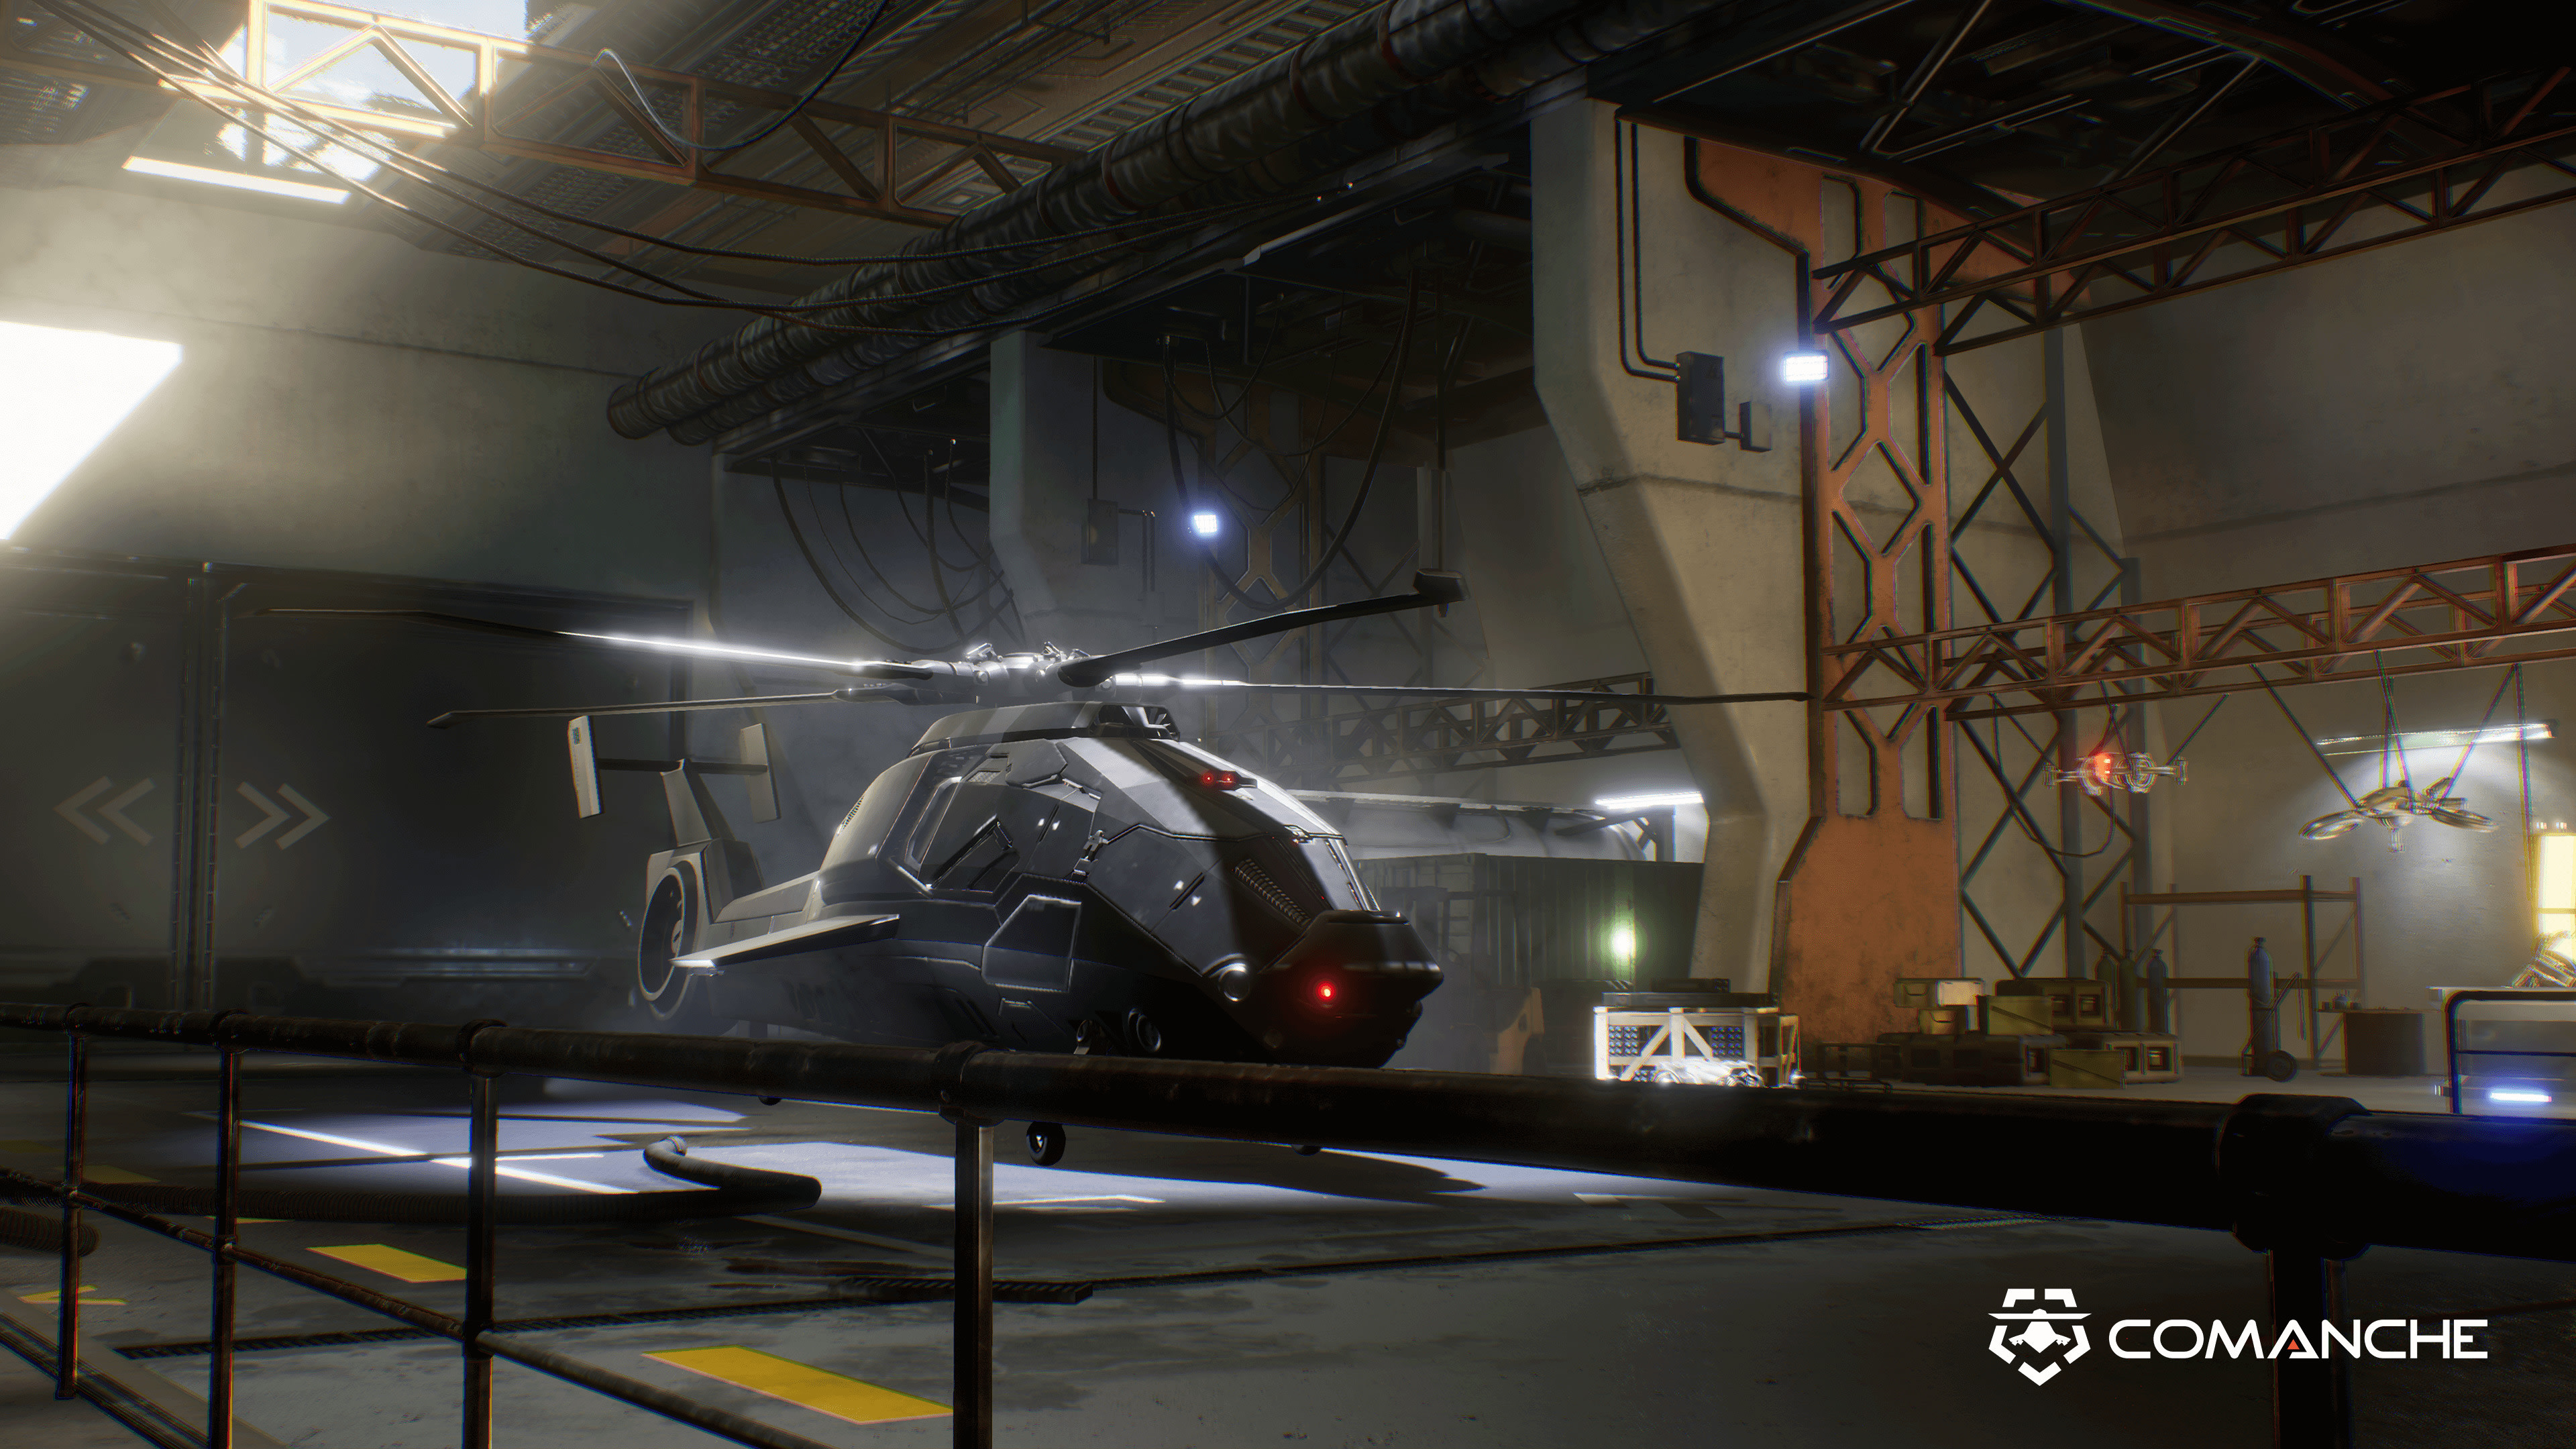 Attack Helicopter Comanche Video Game Helicopter 3840x2160